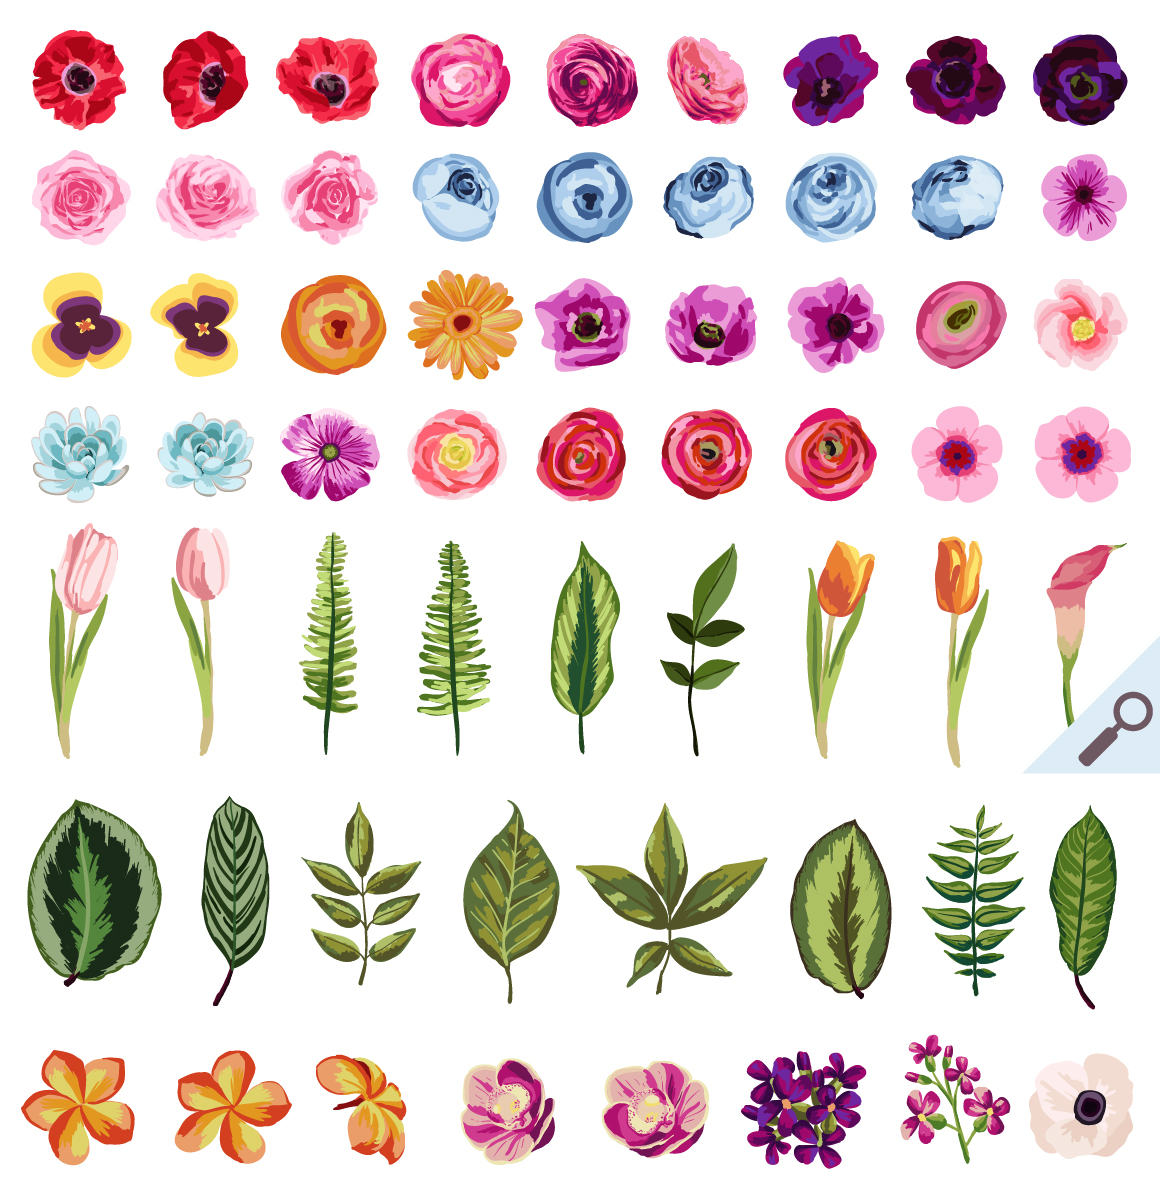 Cute Flowers To Draw How To Draw Cute Flowers Easy & Kawaii Drawings